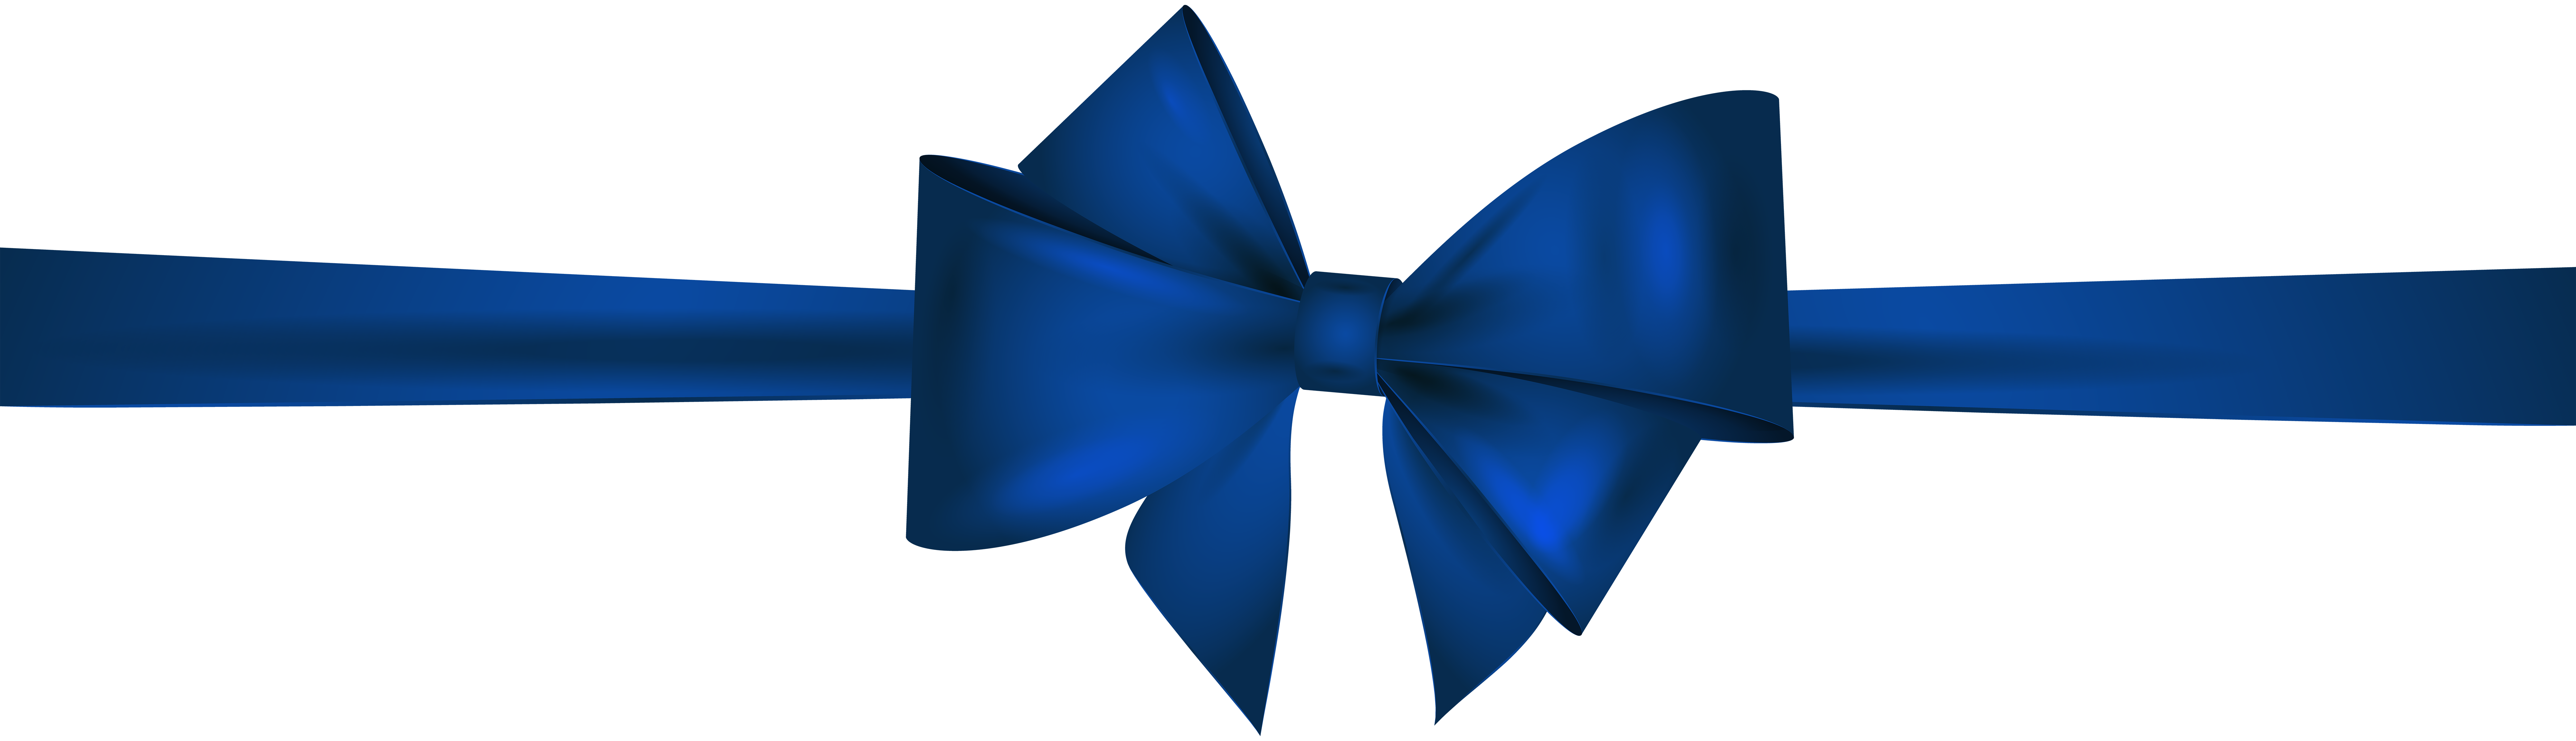 Blue Bow PNG Clip Art | Gallery Yopriceville - High-Quality Images and ...